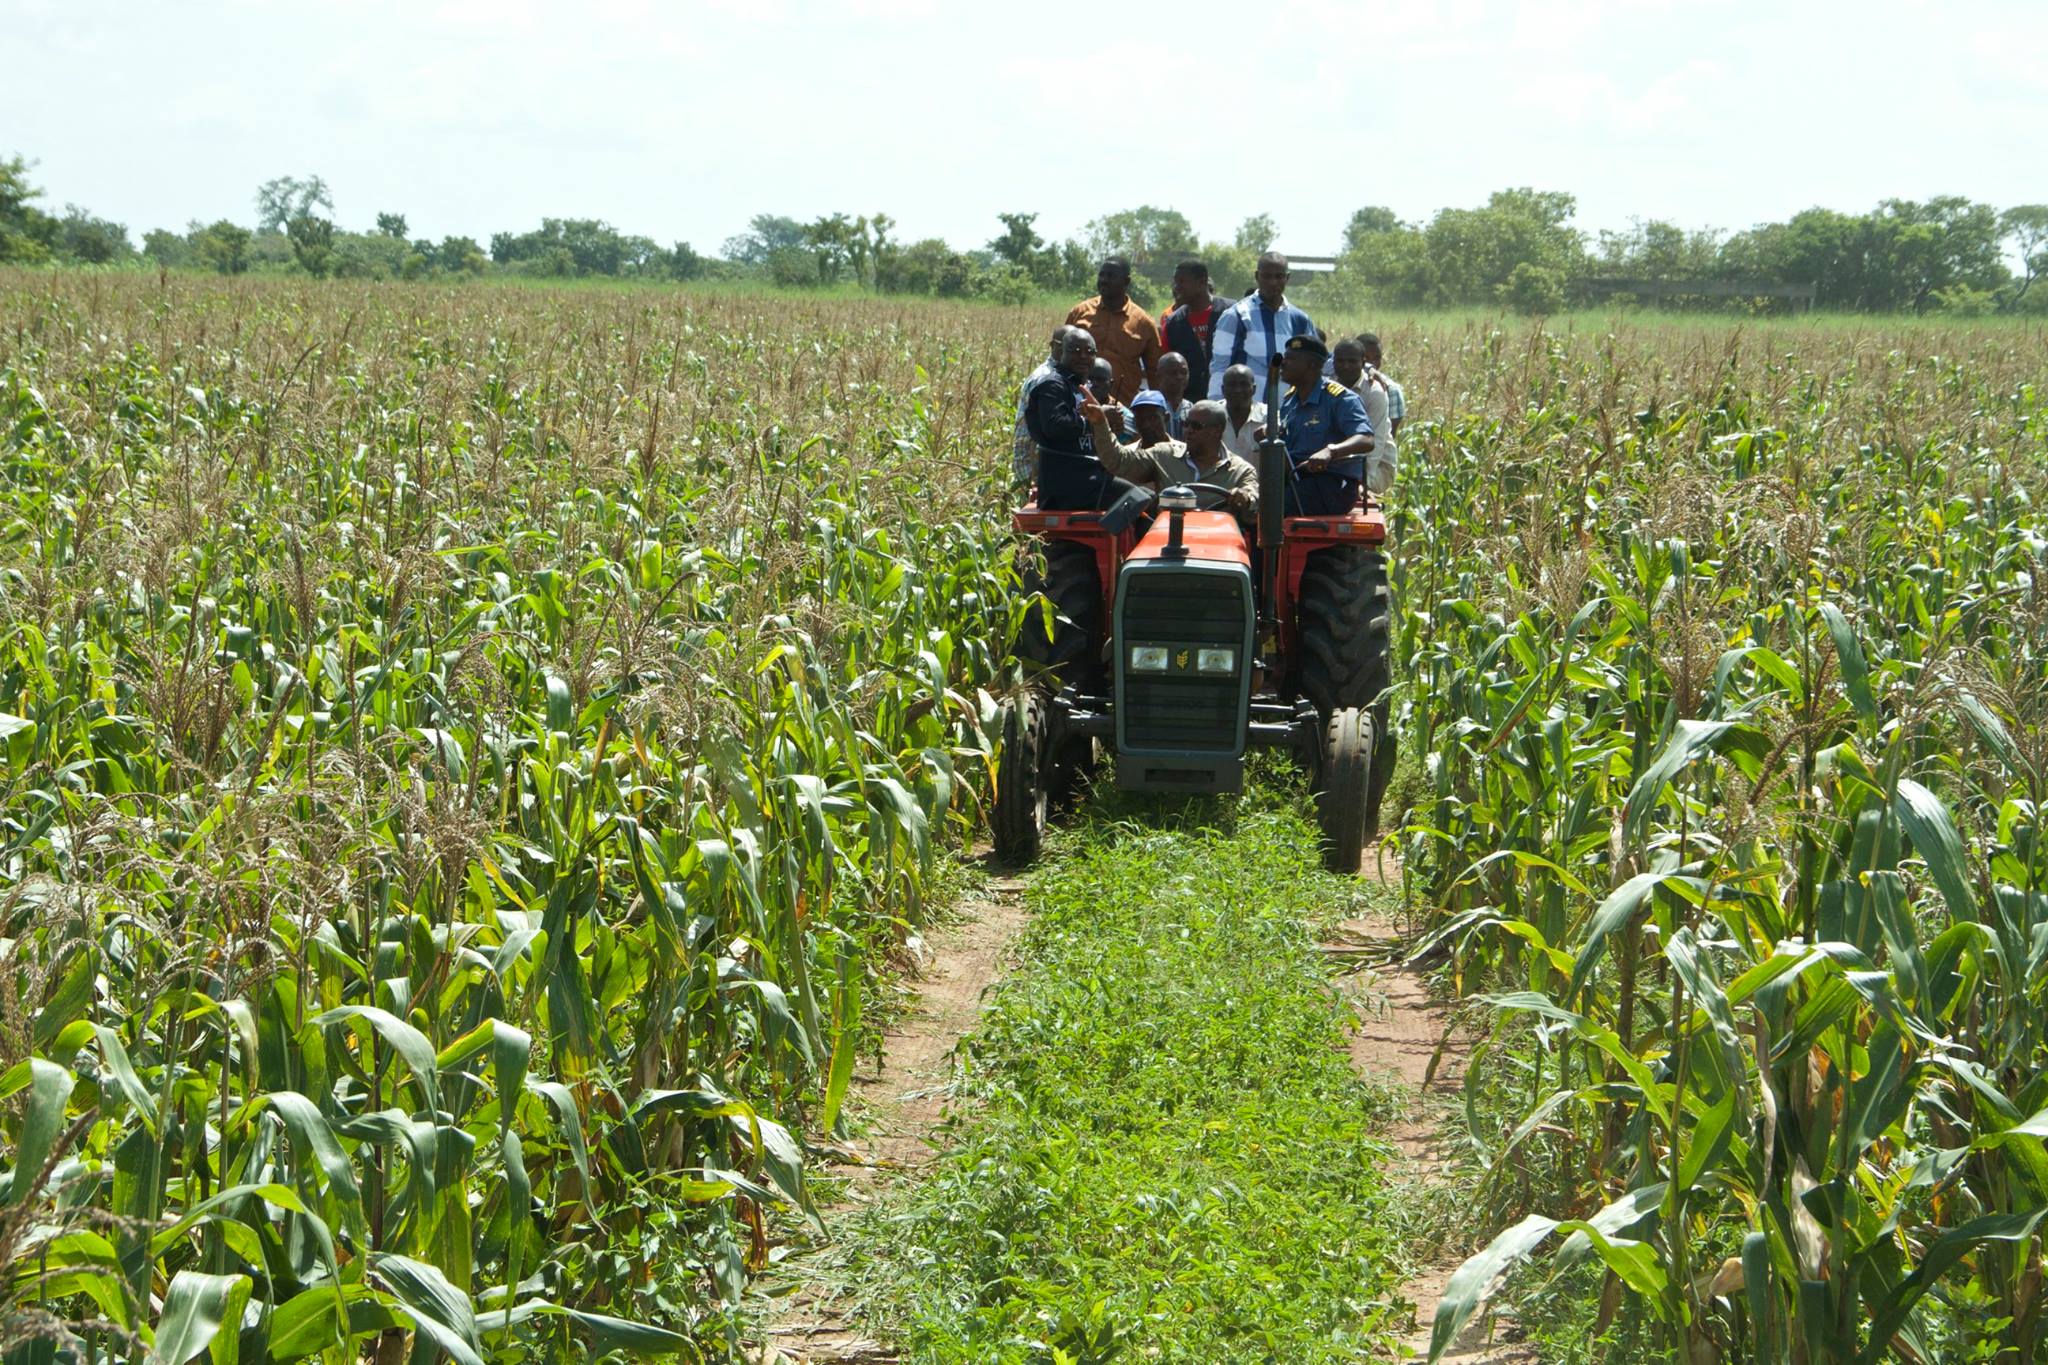 Reviving the love of farming and revolutionizing the agriculture industry are NDC’s two main goals, according to Mahama